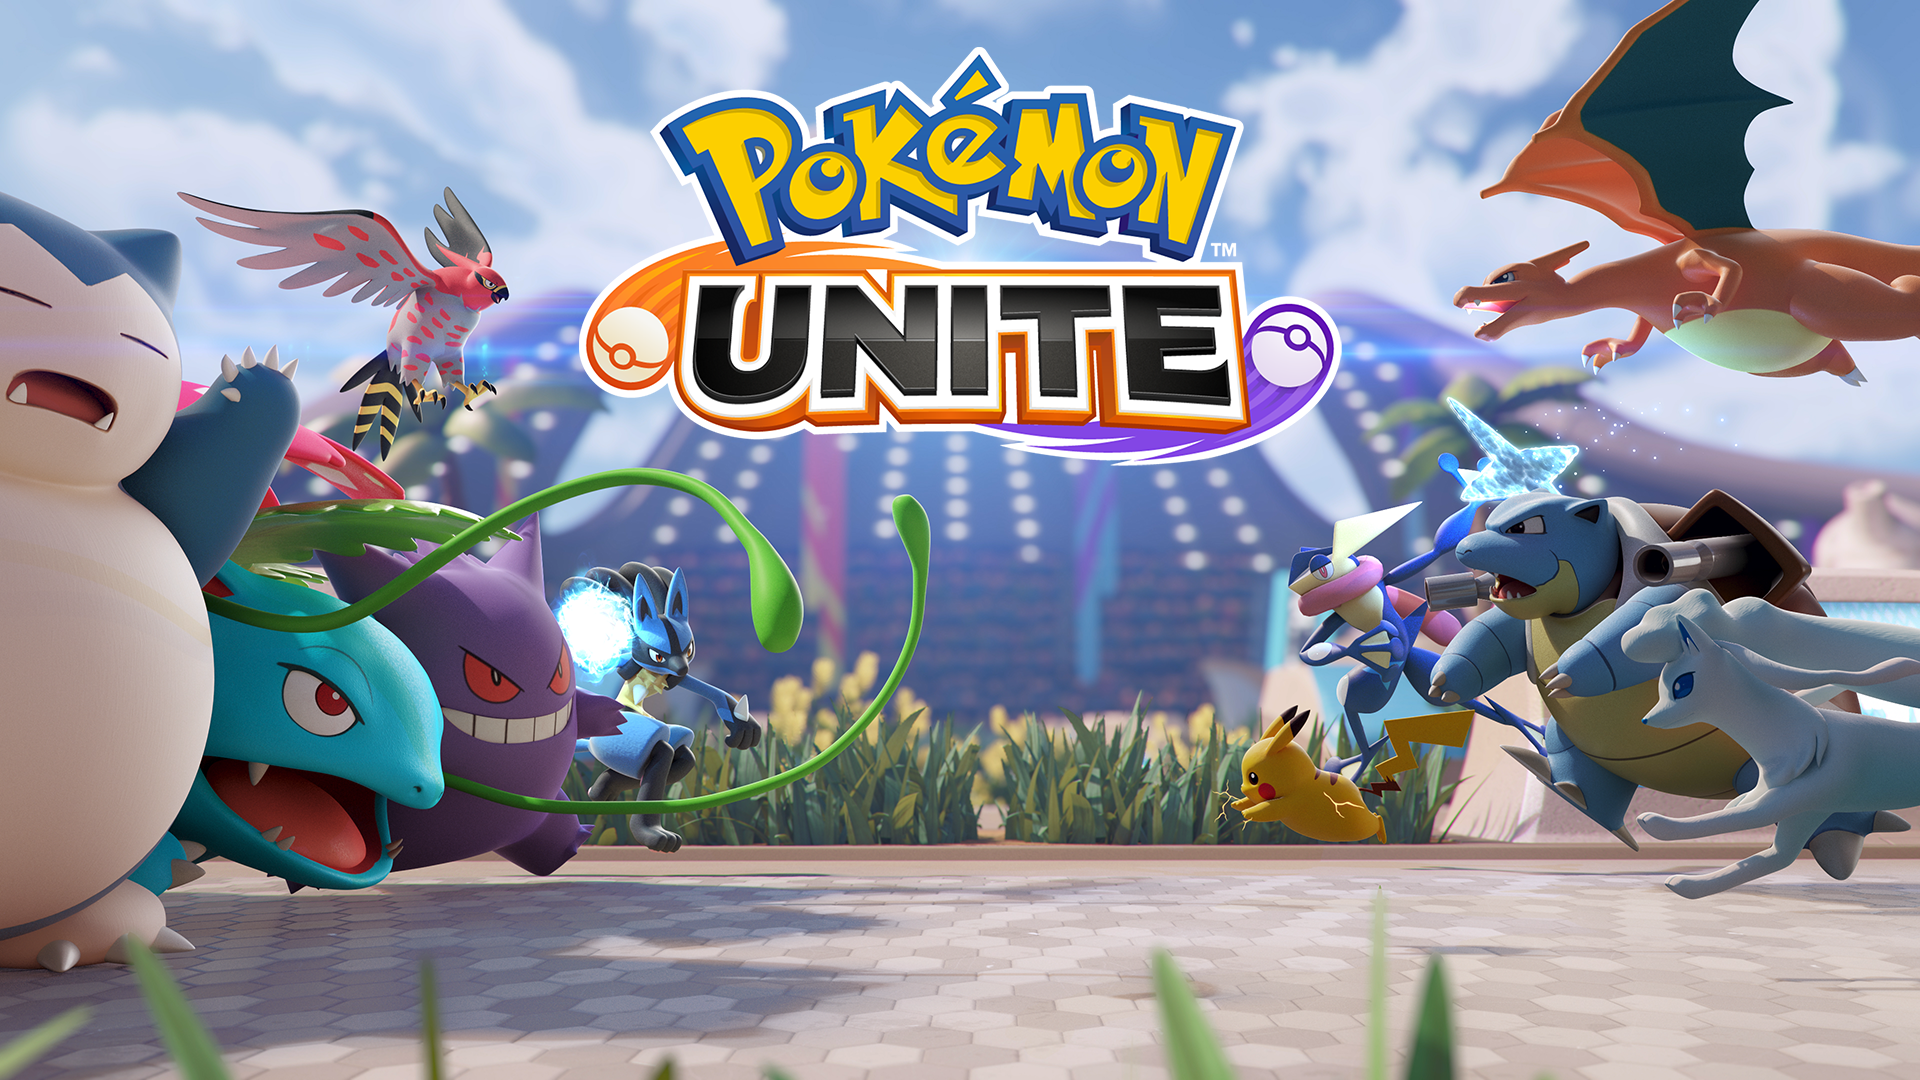 Pokémon Unite is a 5v5 free-to-play MOBA, now on Switch